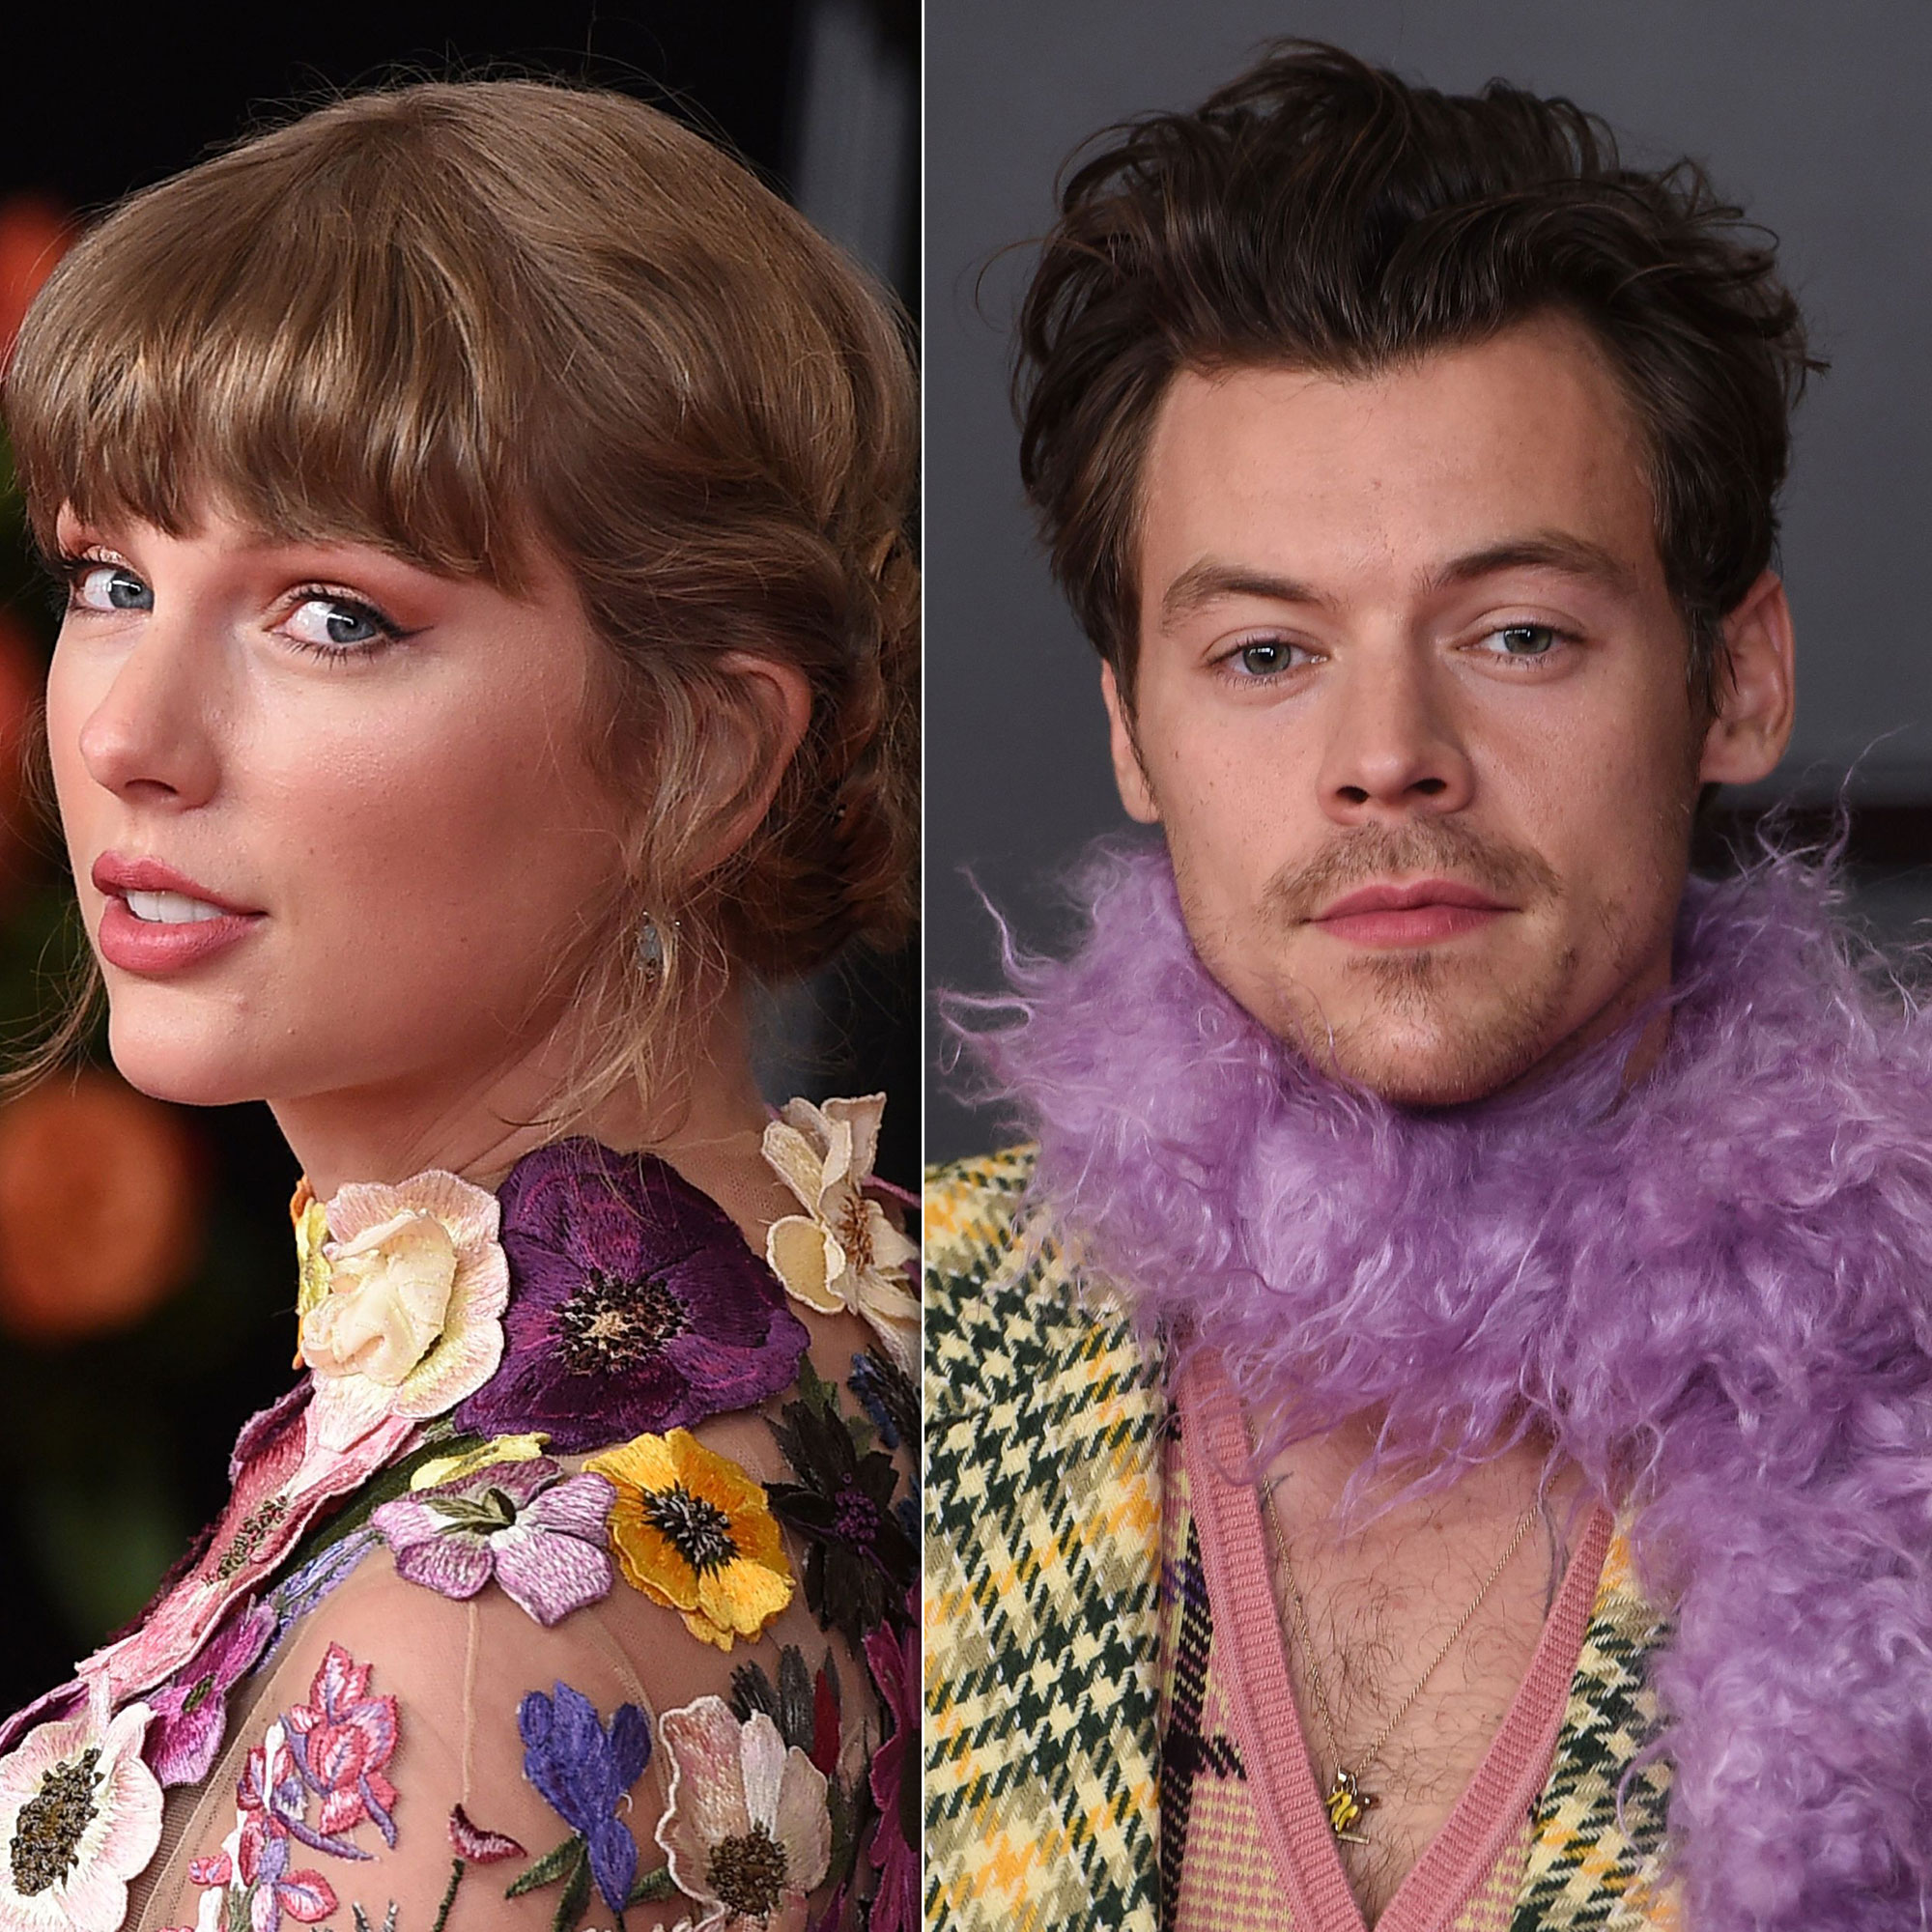 Taylor Swift Porn Solo - Taylor Swift, Harry Styles Reunite at 2021 Grammys: Video